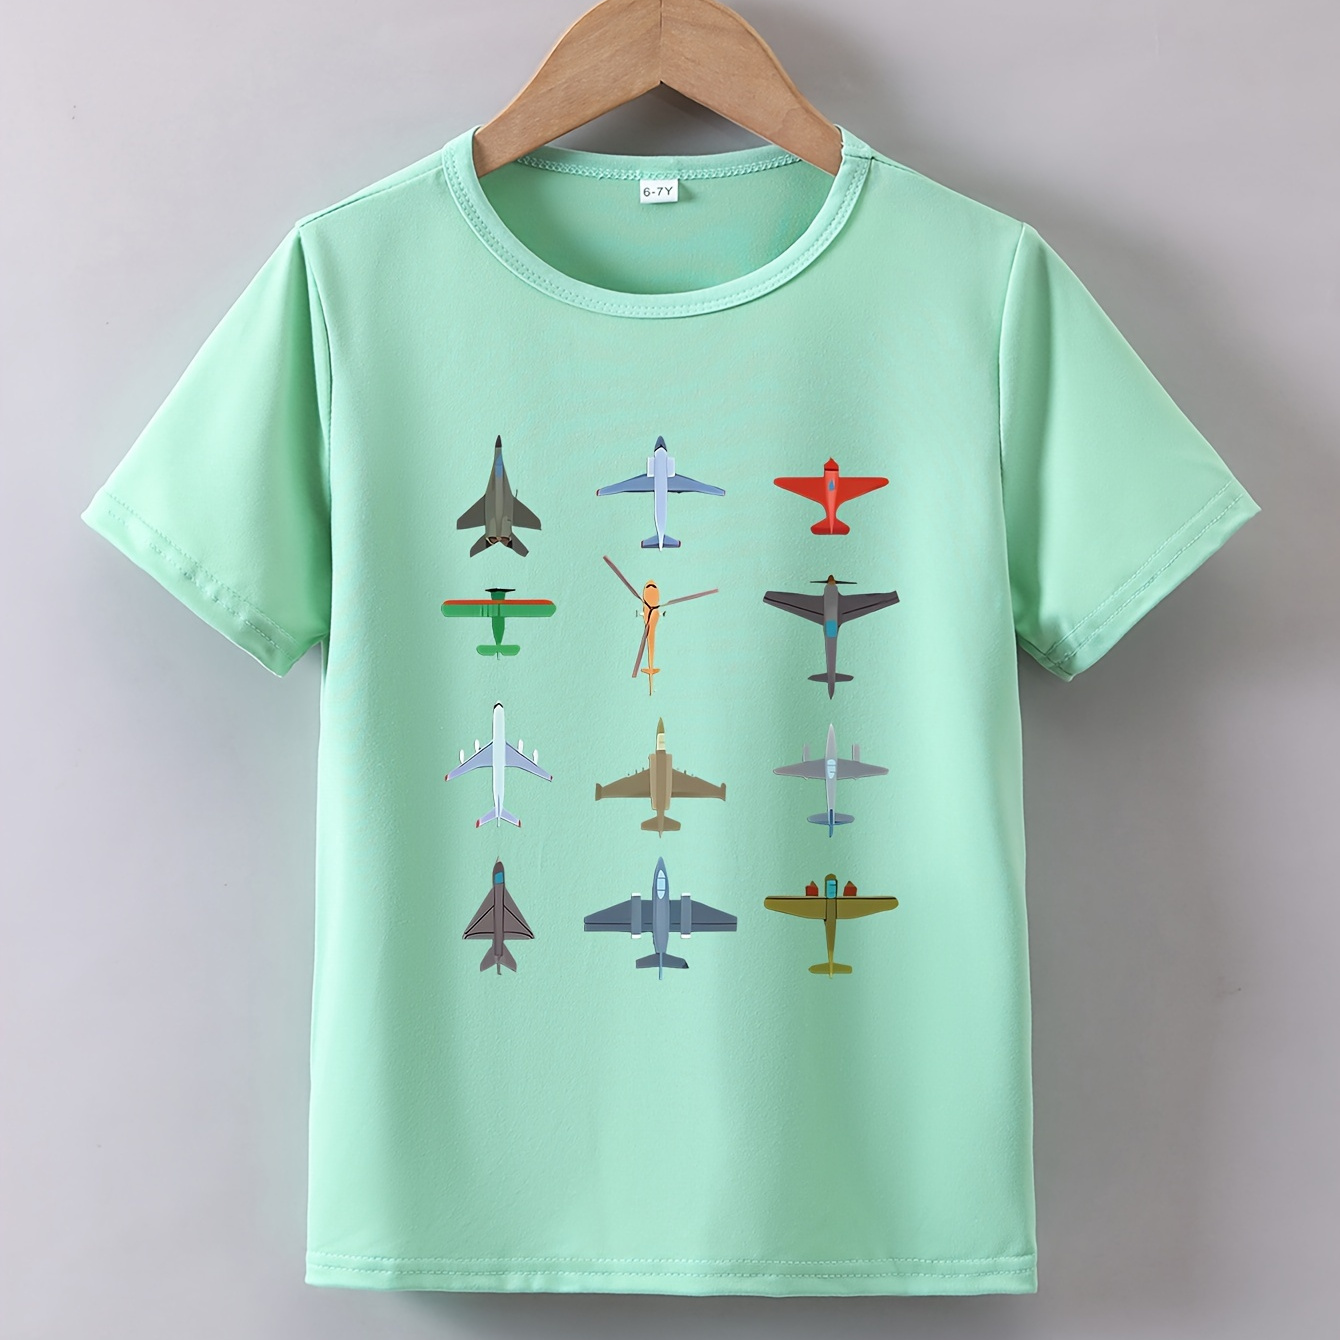 

Airplane Collection Print Boy's Crew Neck T-shirt, Short Sleeve Comfy Versatile Tee Tops, Summer Casual Clothing